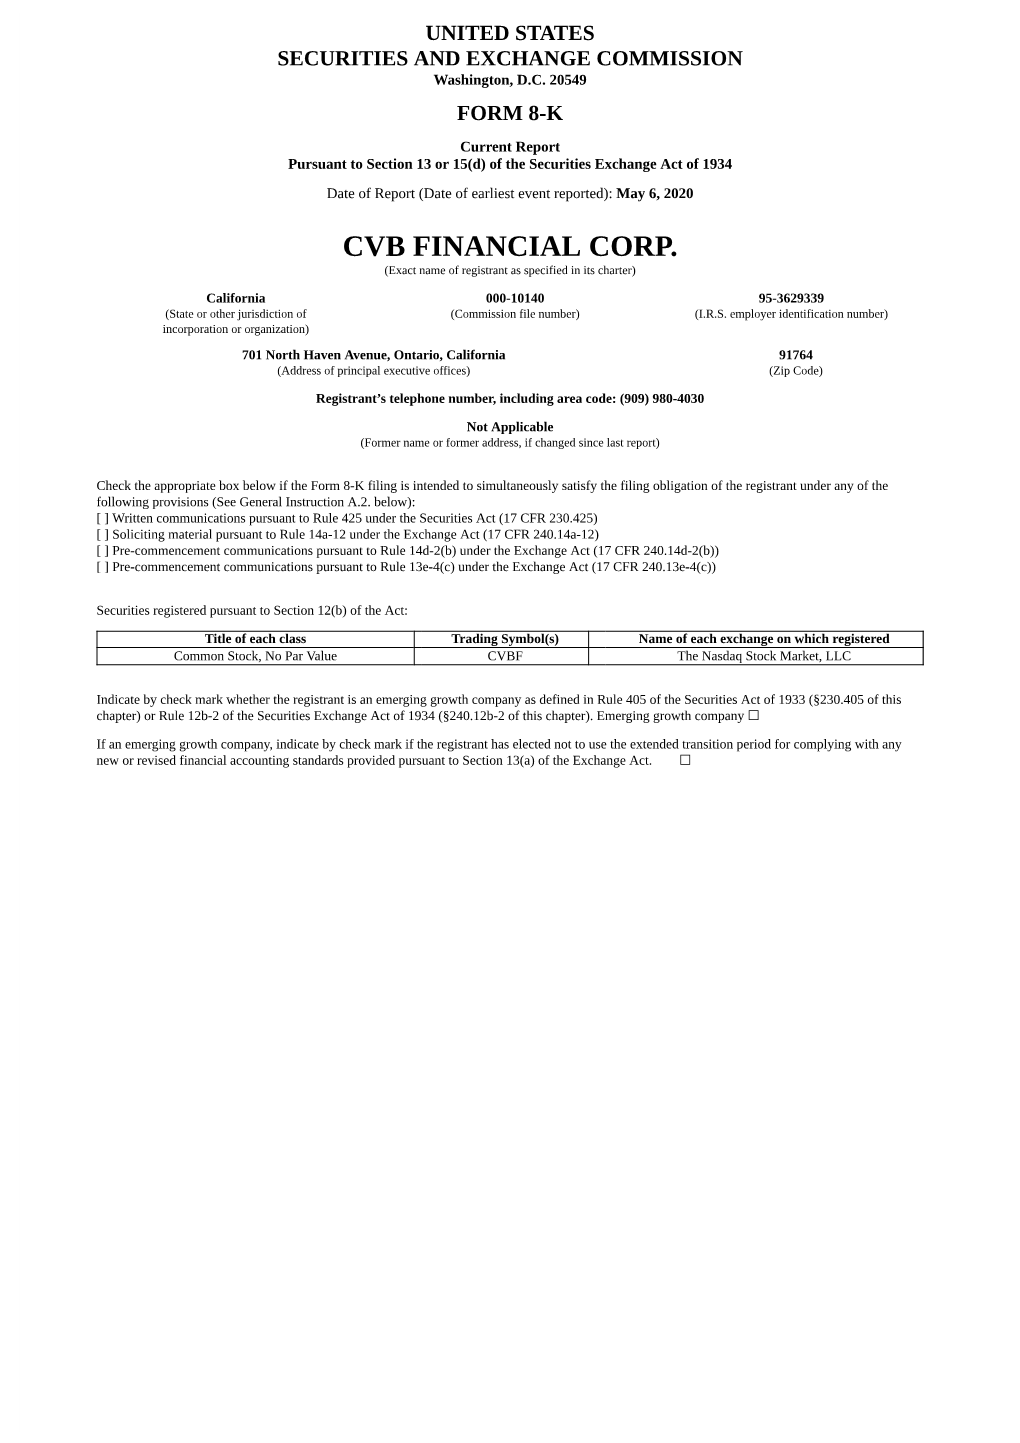 CVB FINANCIAL CORP. (Exact Name of Registrant As Specified in Its Charter)